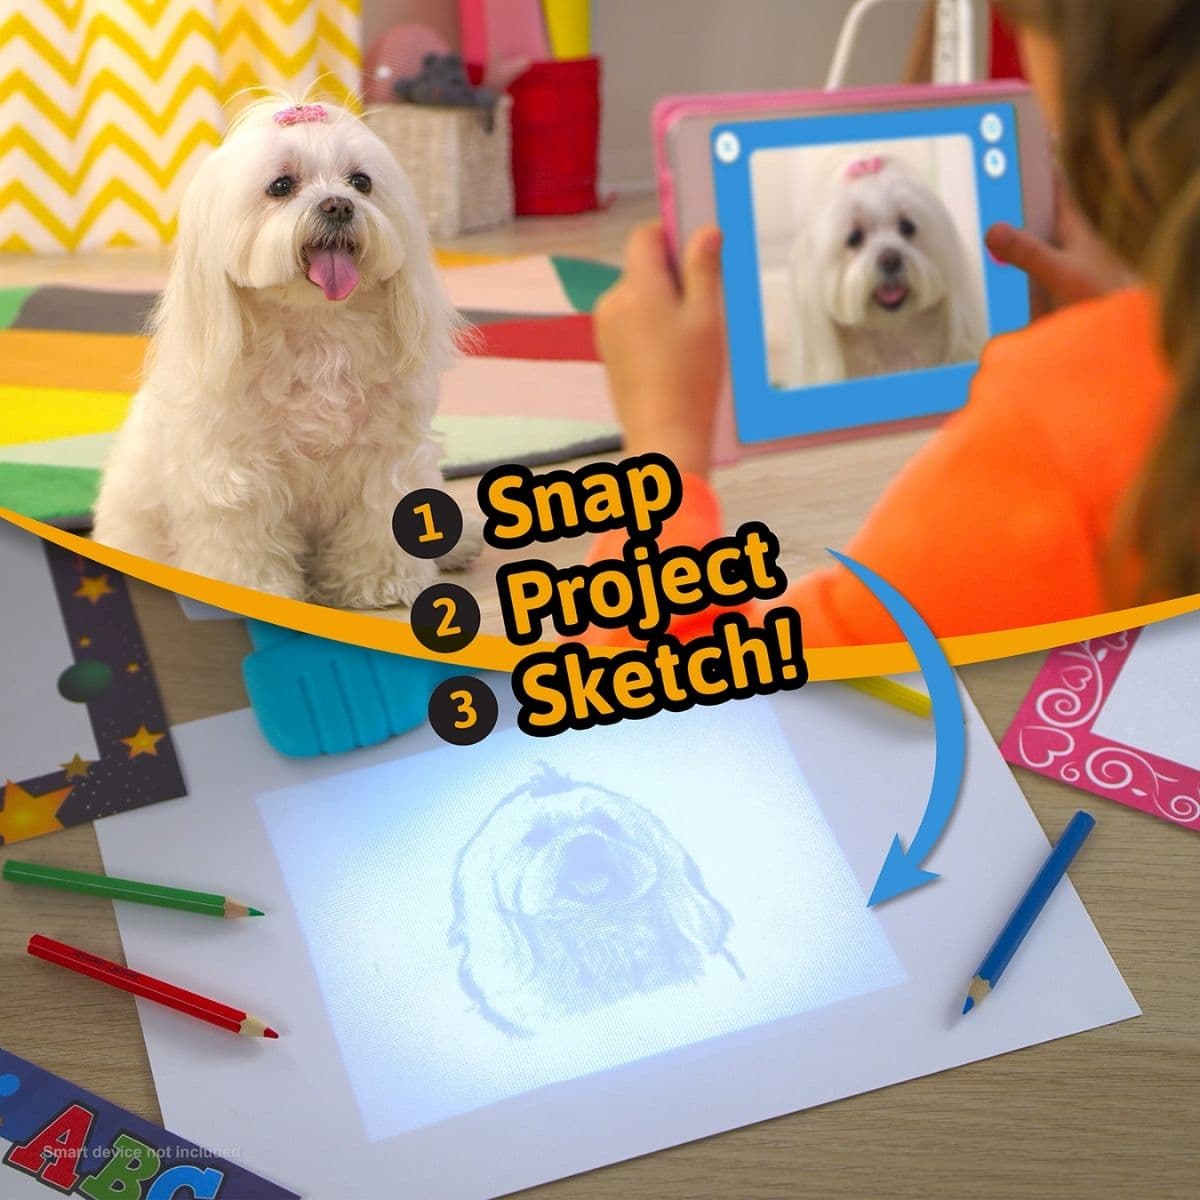 Flycatcher Toys on Instagram: In search of a creative way for your kids to  engage in a screen-free activity? Check out the smART Pixelator™, a  ​​​​​​​​​screen-free platform that allows your kids to